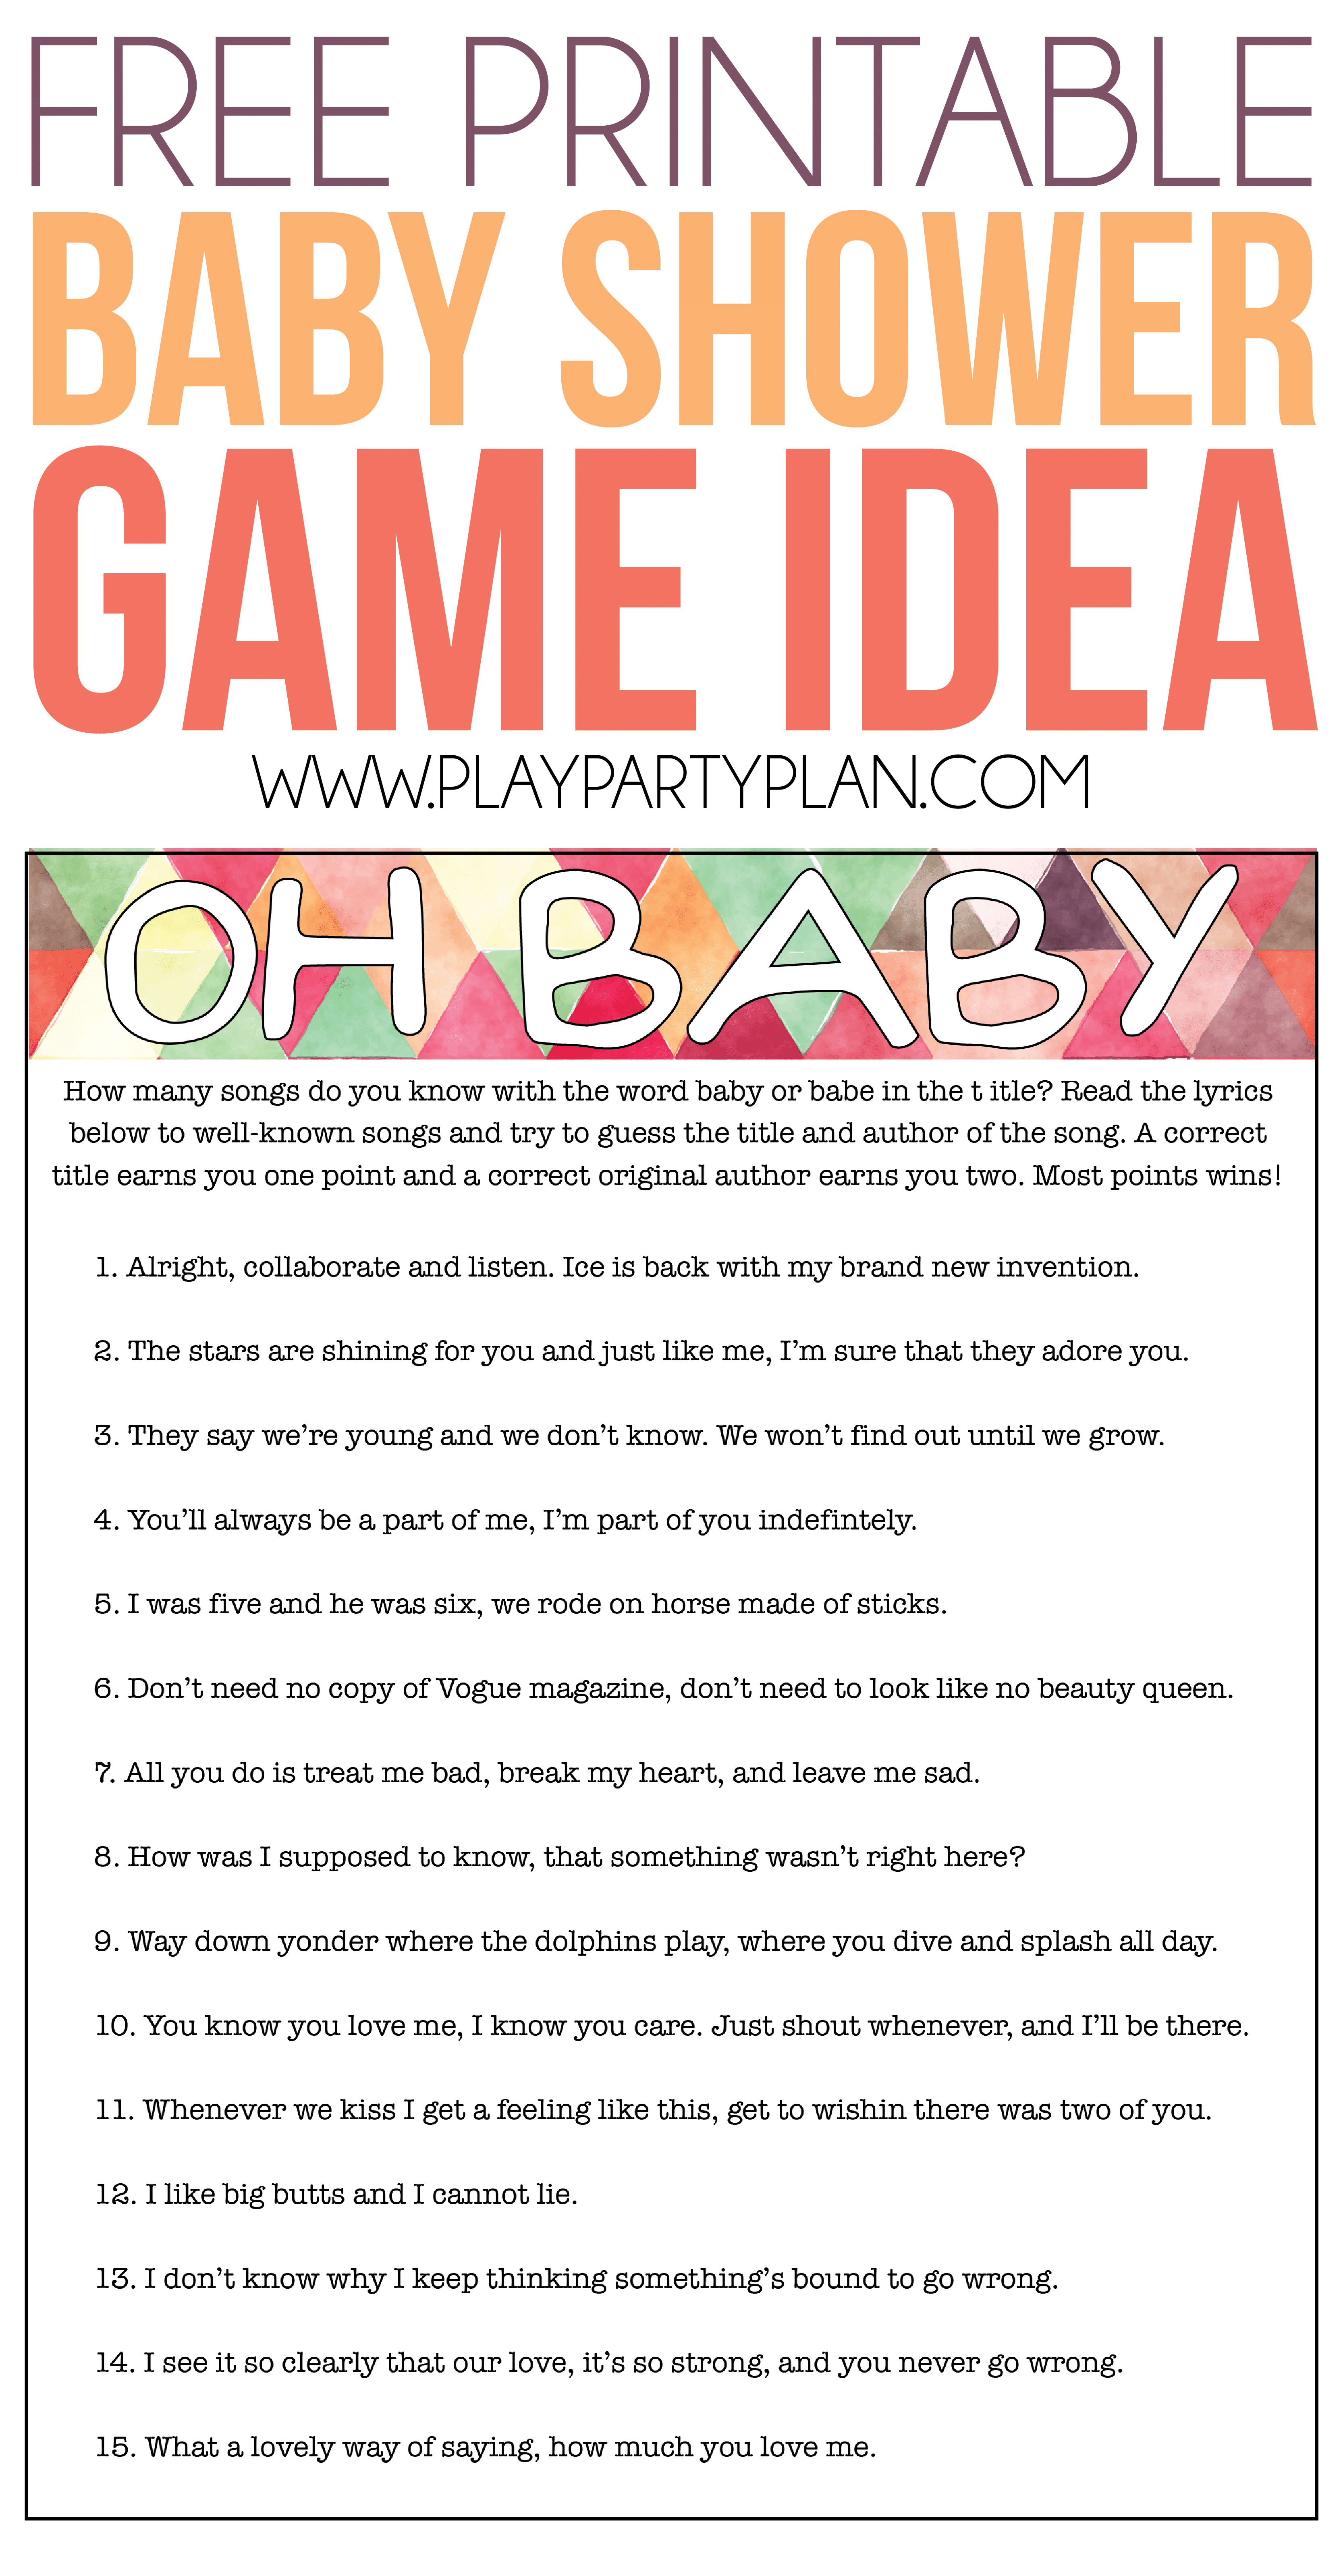 Oh Baby! Free Printable Baby Shower Game Expecting Moms Will Love - Name That Tune Baby Shower Game Free Printable